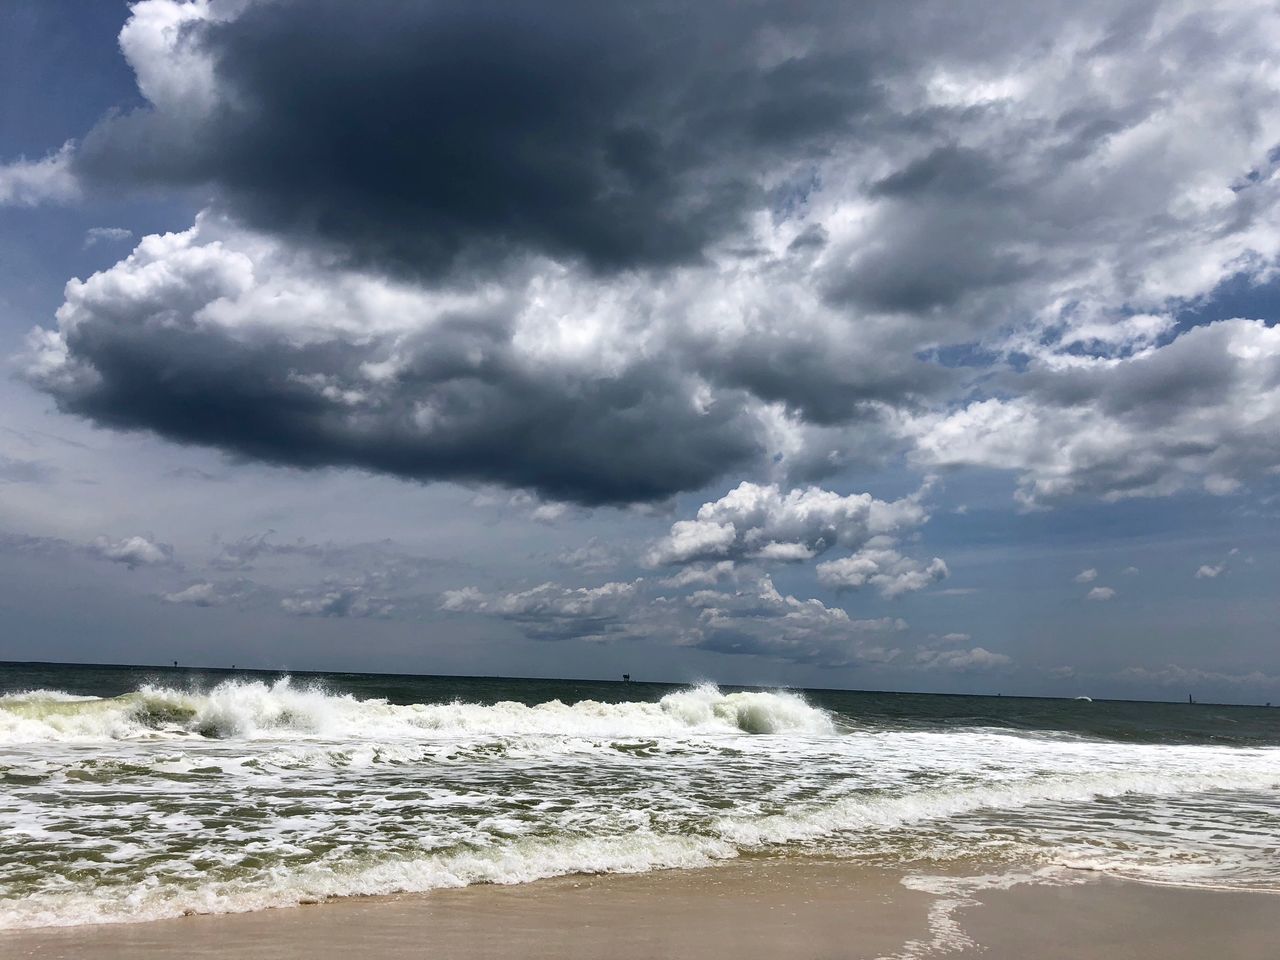 cloud - sky, sea, sky, water, wave, motion, beauty in nature, sport, beach, horizon over water, horizon, land, surfing, power in nature, aquatic sport, storm, scenics - nature, power, outdoors, ominous